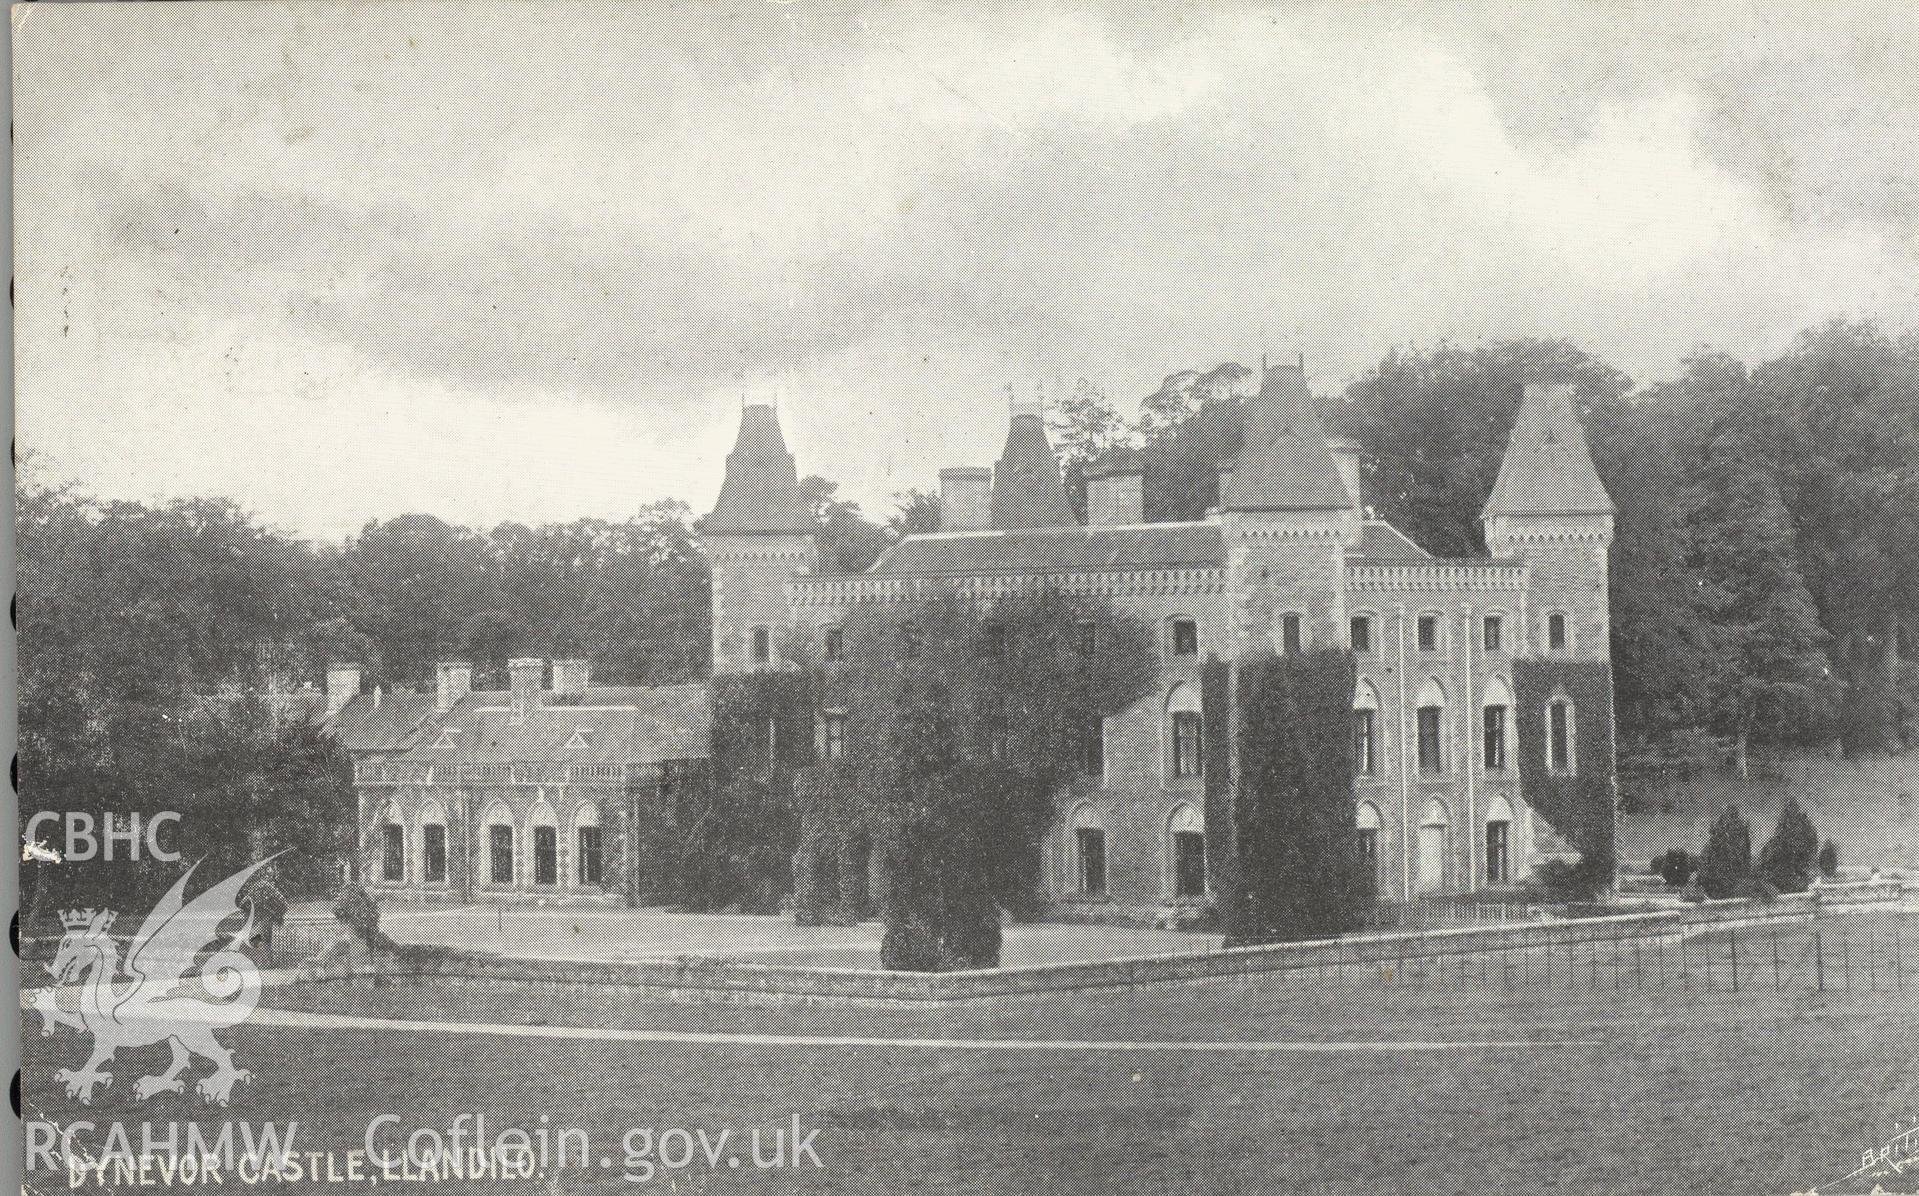 Digitised postcard image of Newton House, Llandeilo, Williams Llandeilo. Produced by Parks and Gardens Data Services, from an original item in the Peter Davis Collection at Parks and Gardens UK. We hold only web-resolution images of this collection, suitable for viewing on screen and for research purposes only. We do not hold the original images, or publication quality scans.